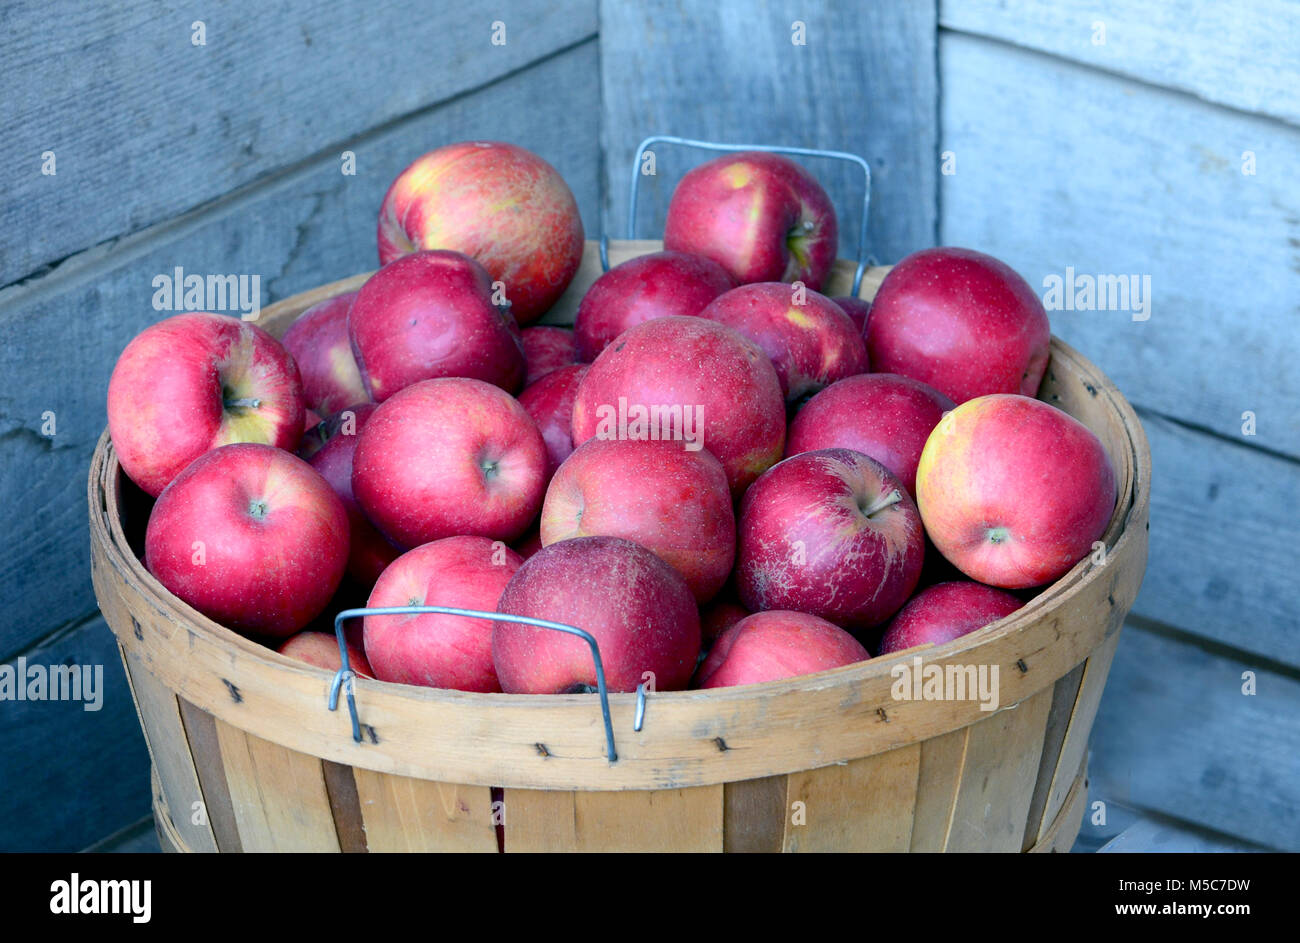 Full bushel basket of red and yellow gala apples fresh picked from a Michigan USA orchard Stock Photo